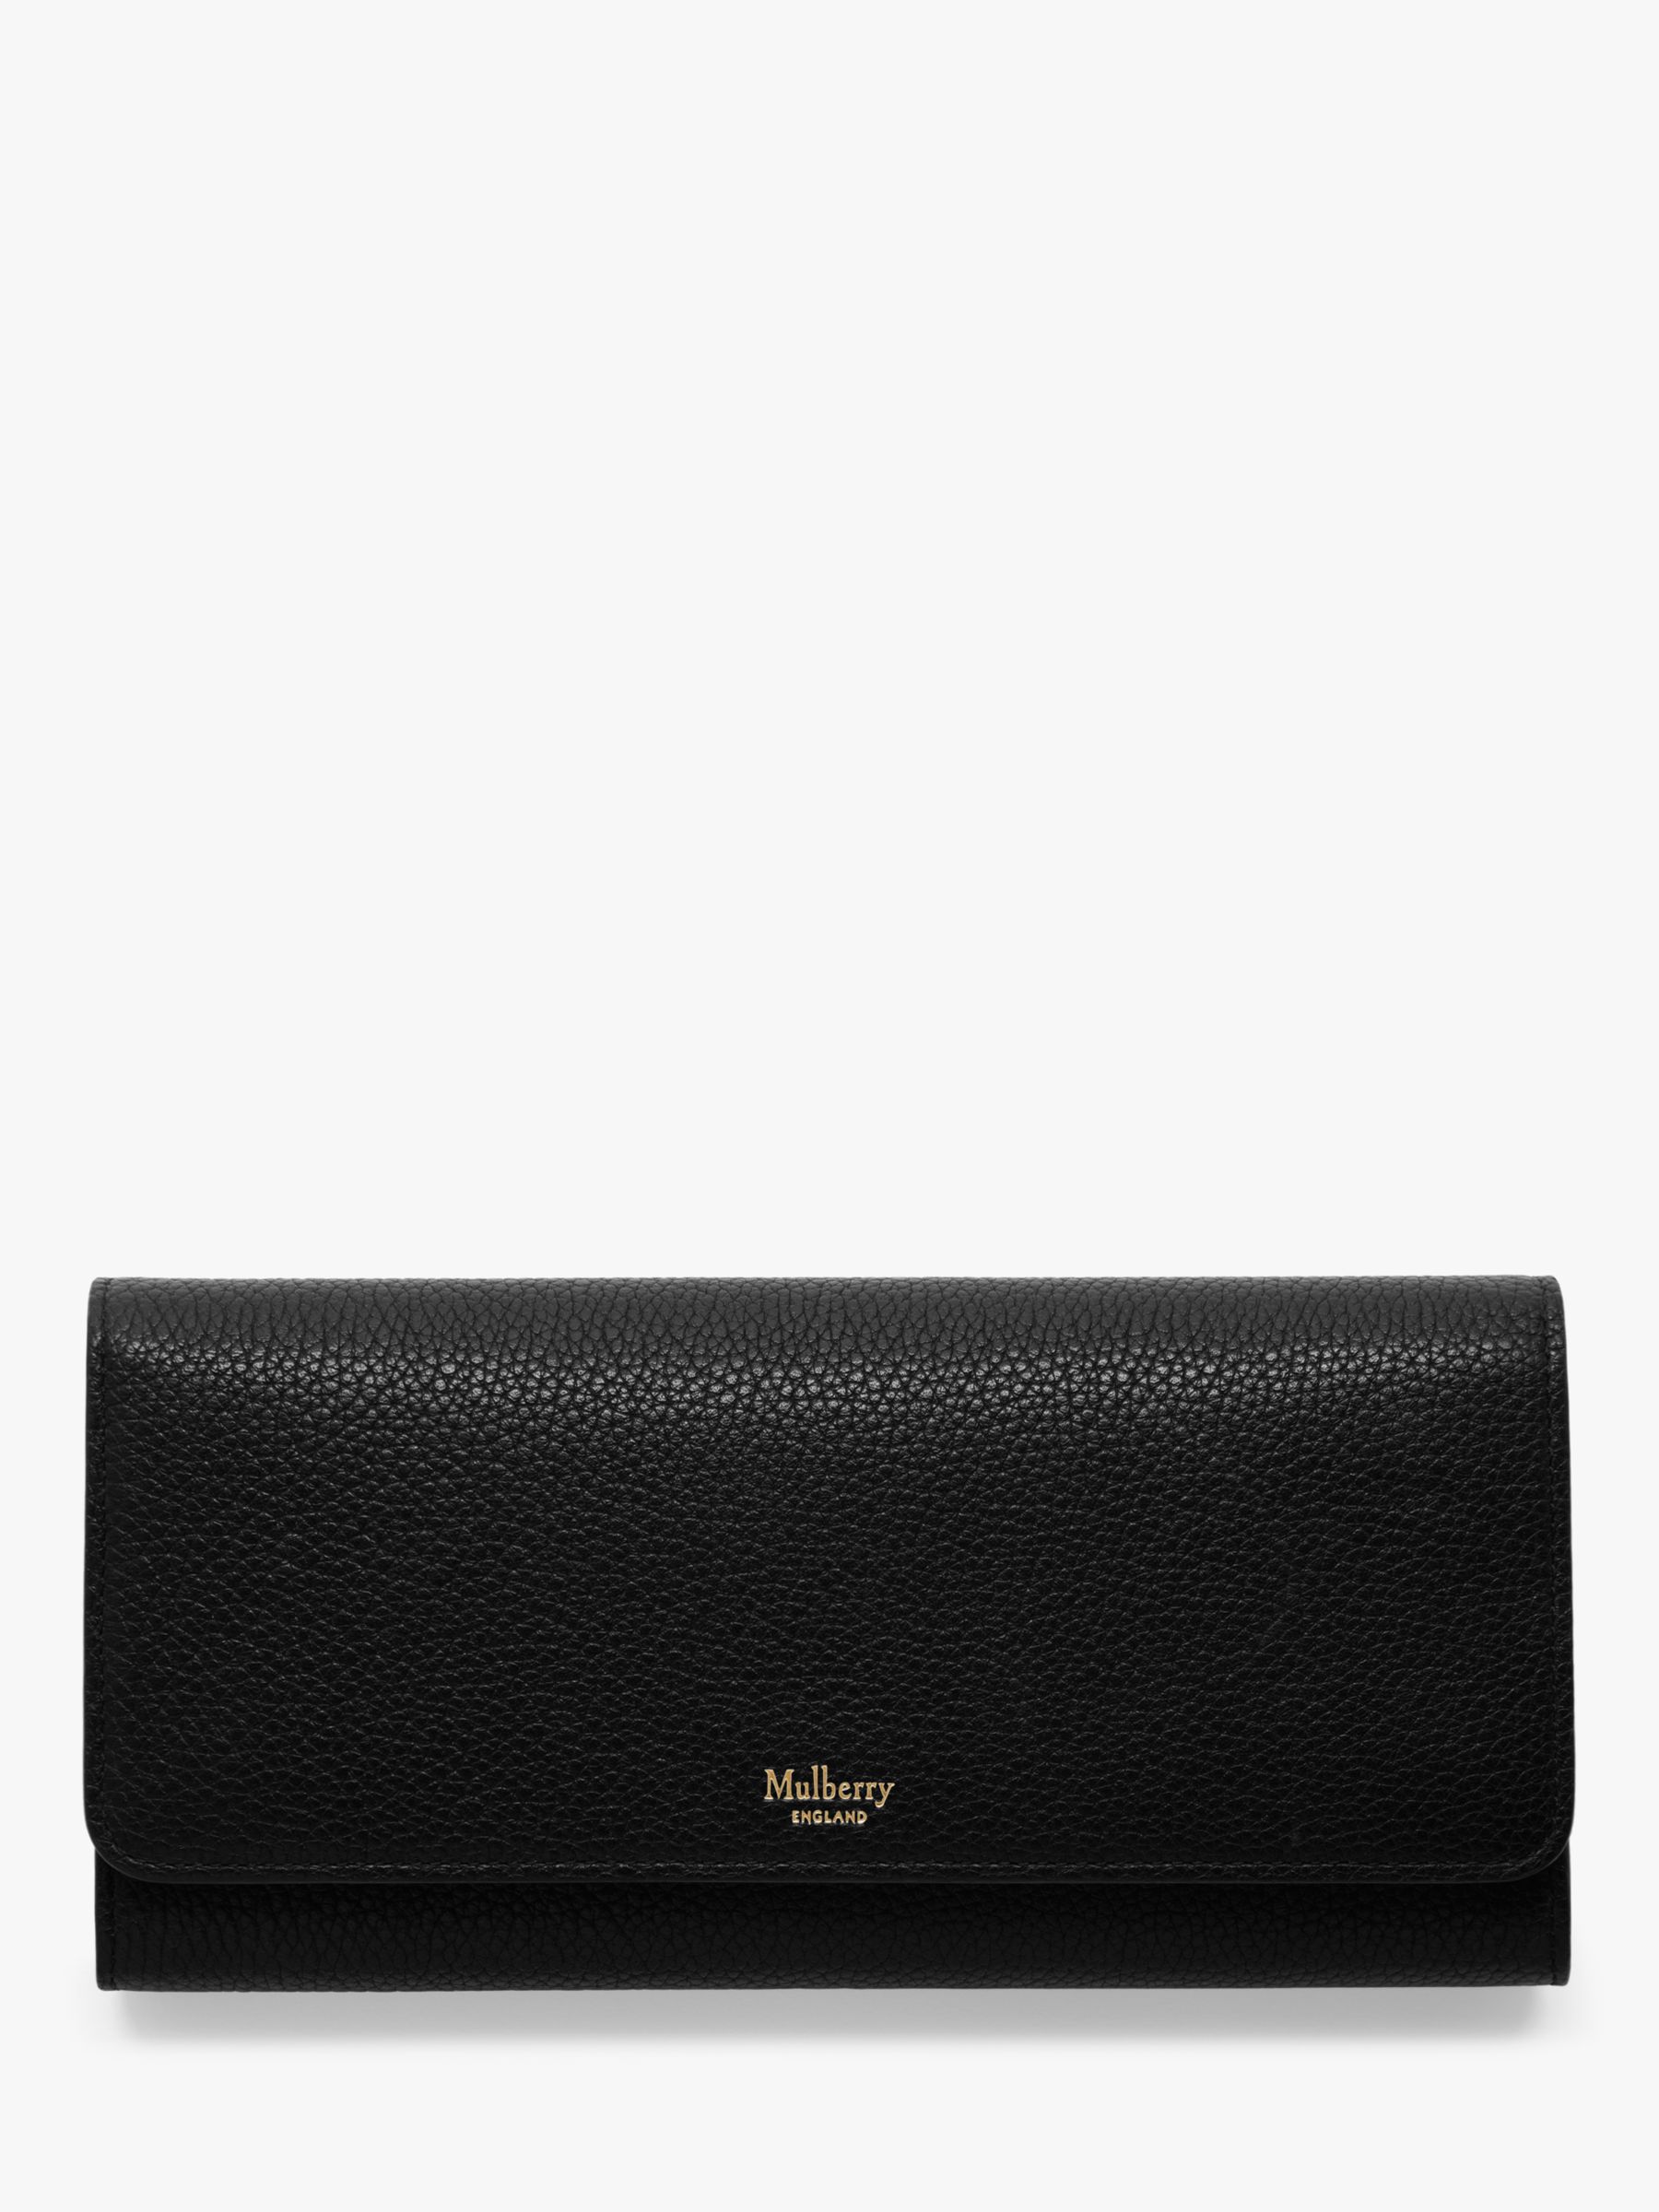 Mulberry Small Classic Grain Leather Continental Wallet, Black